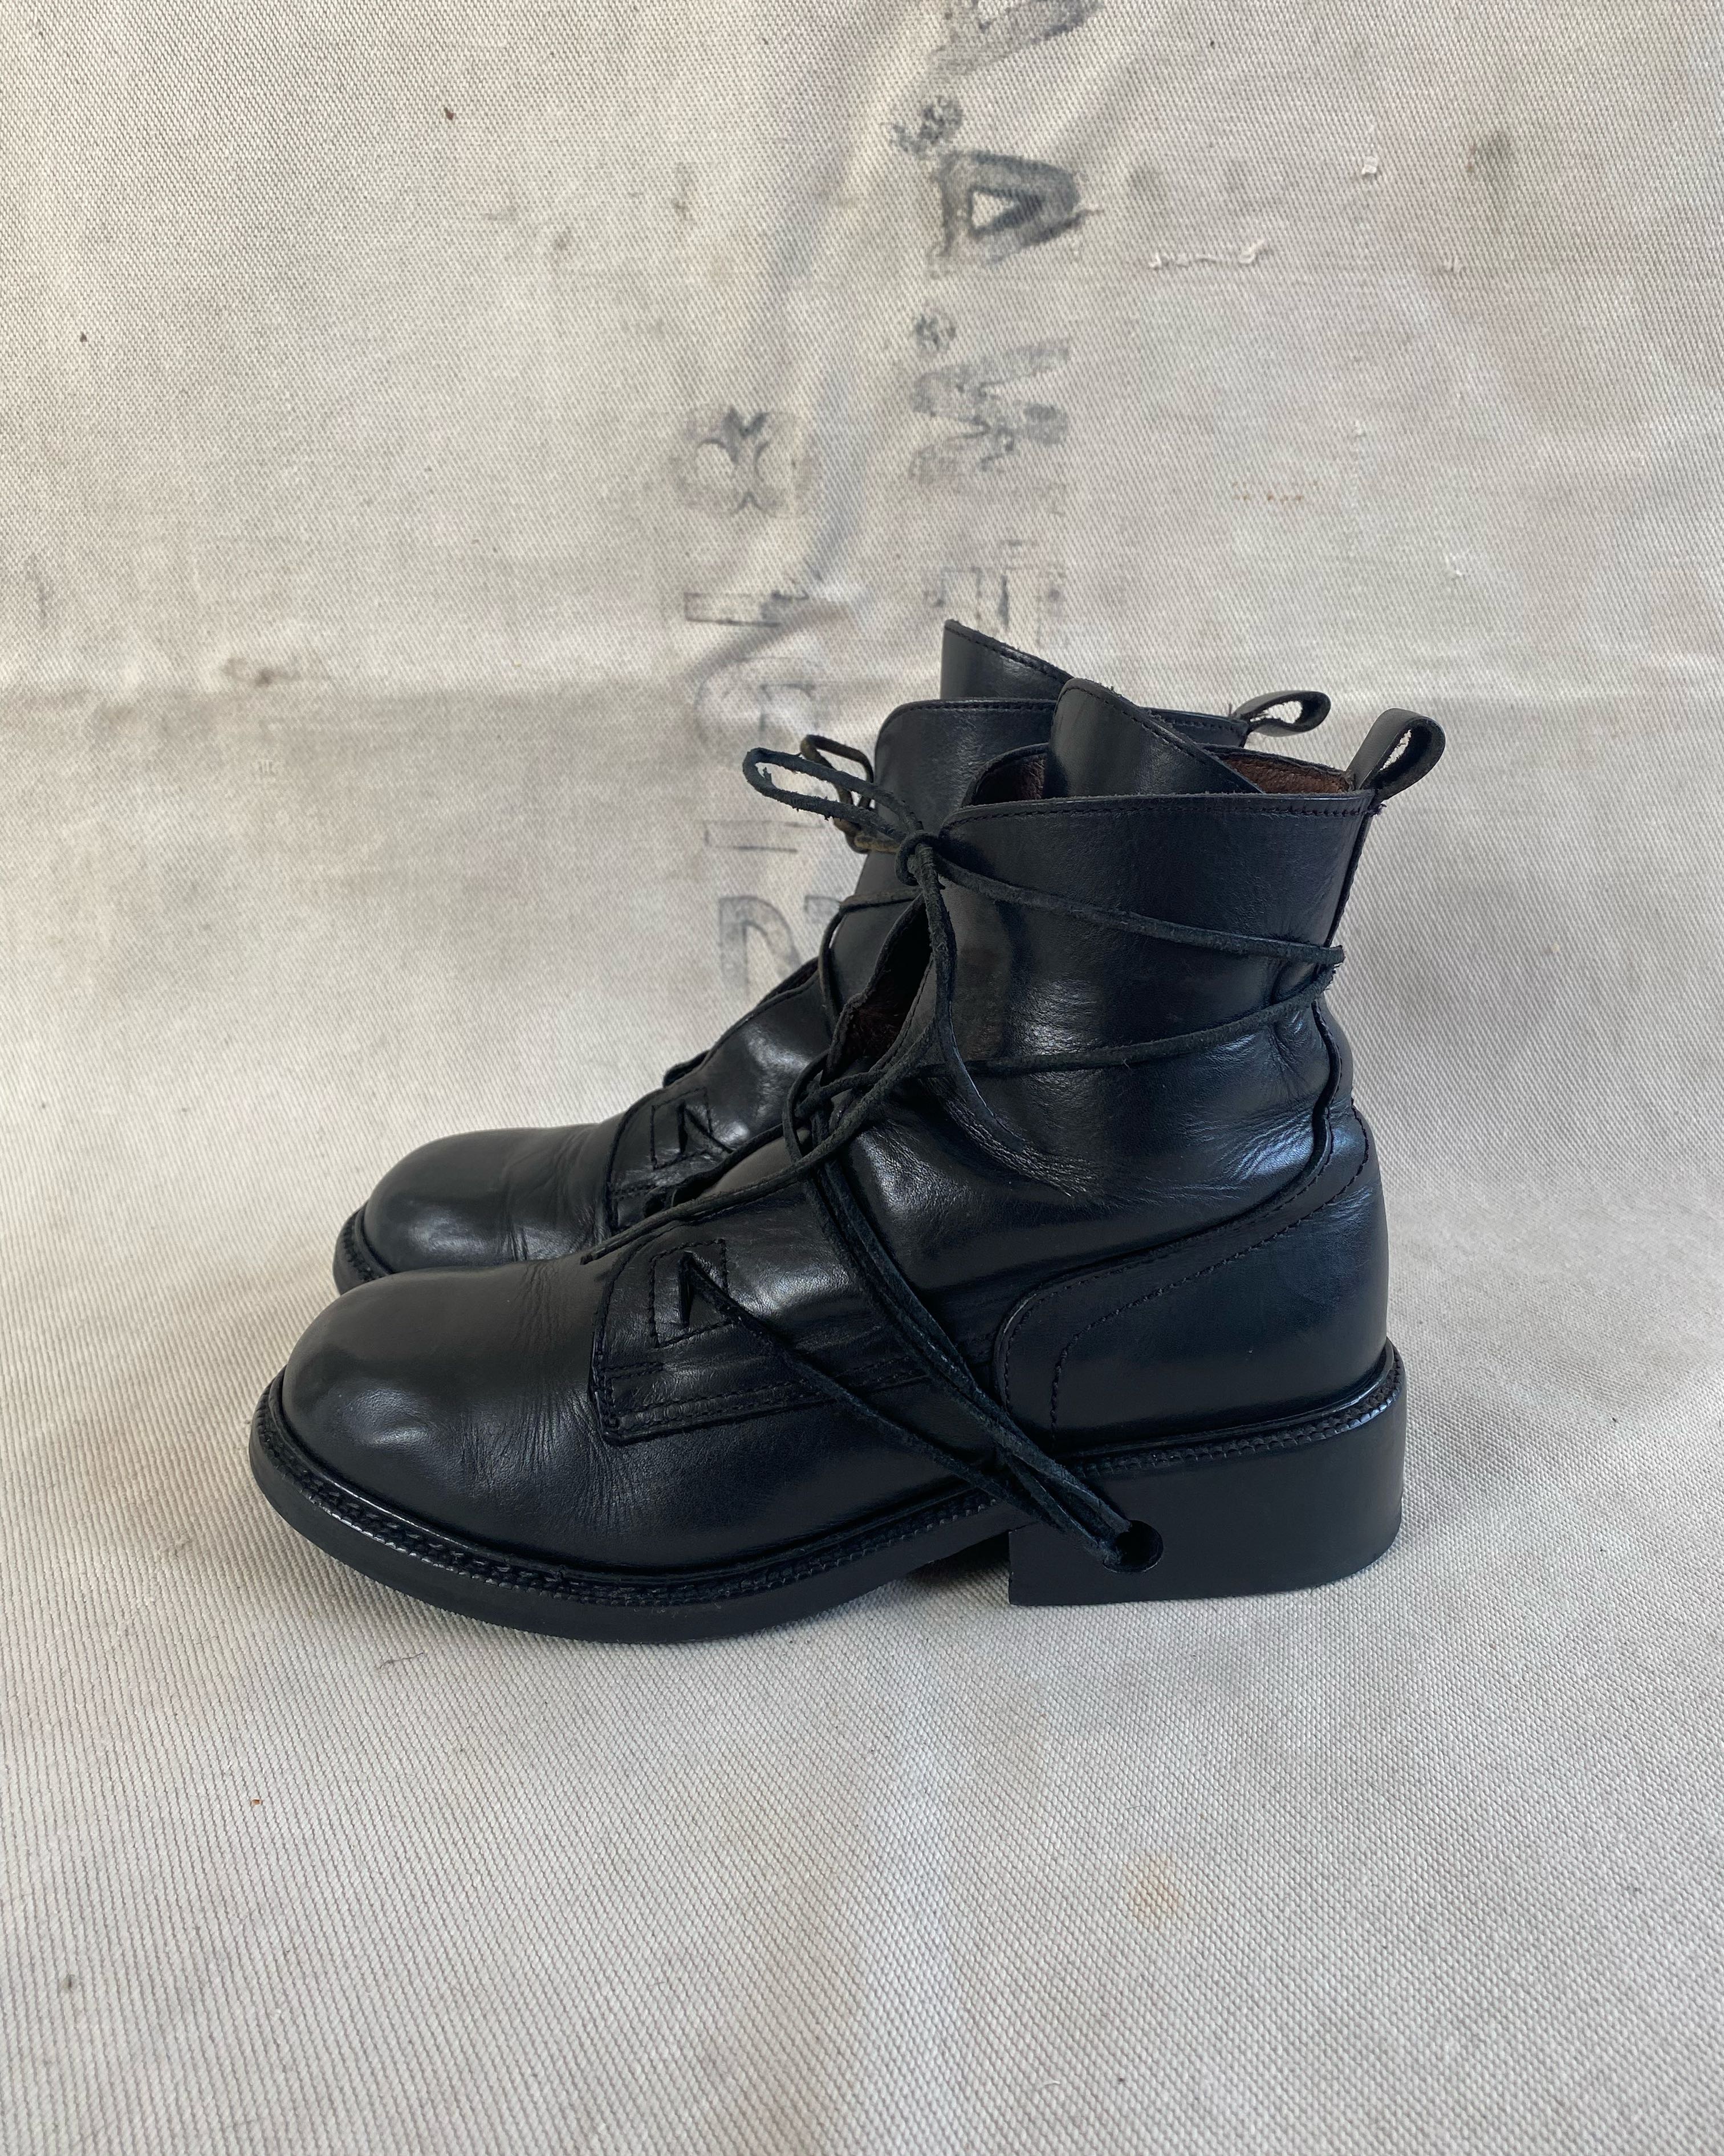 Dirk Bikkembergs 90s Archive Boots - 2